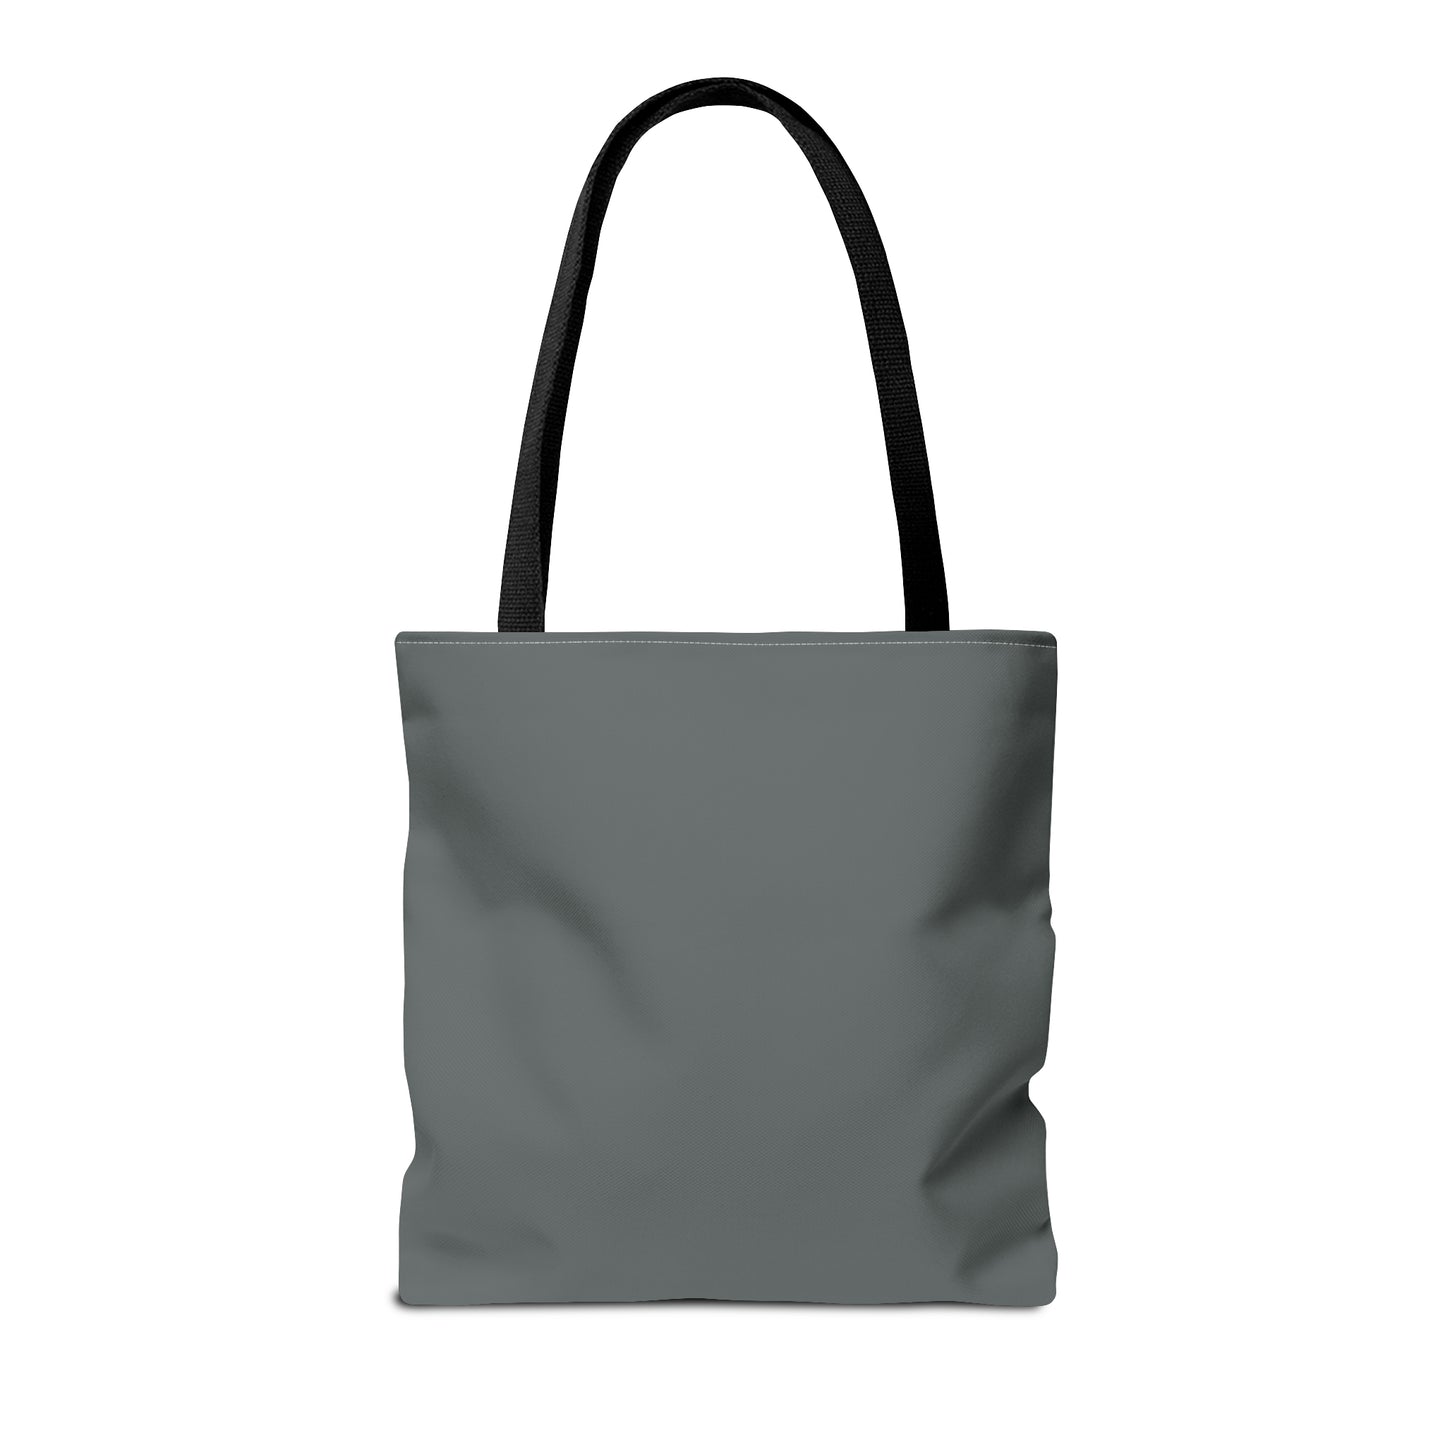 Surviving NOT Thriving - Gray w/ White Tote Bag (AOP)